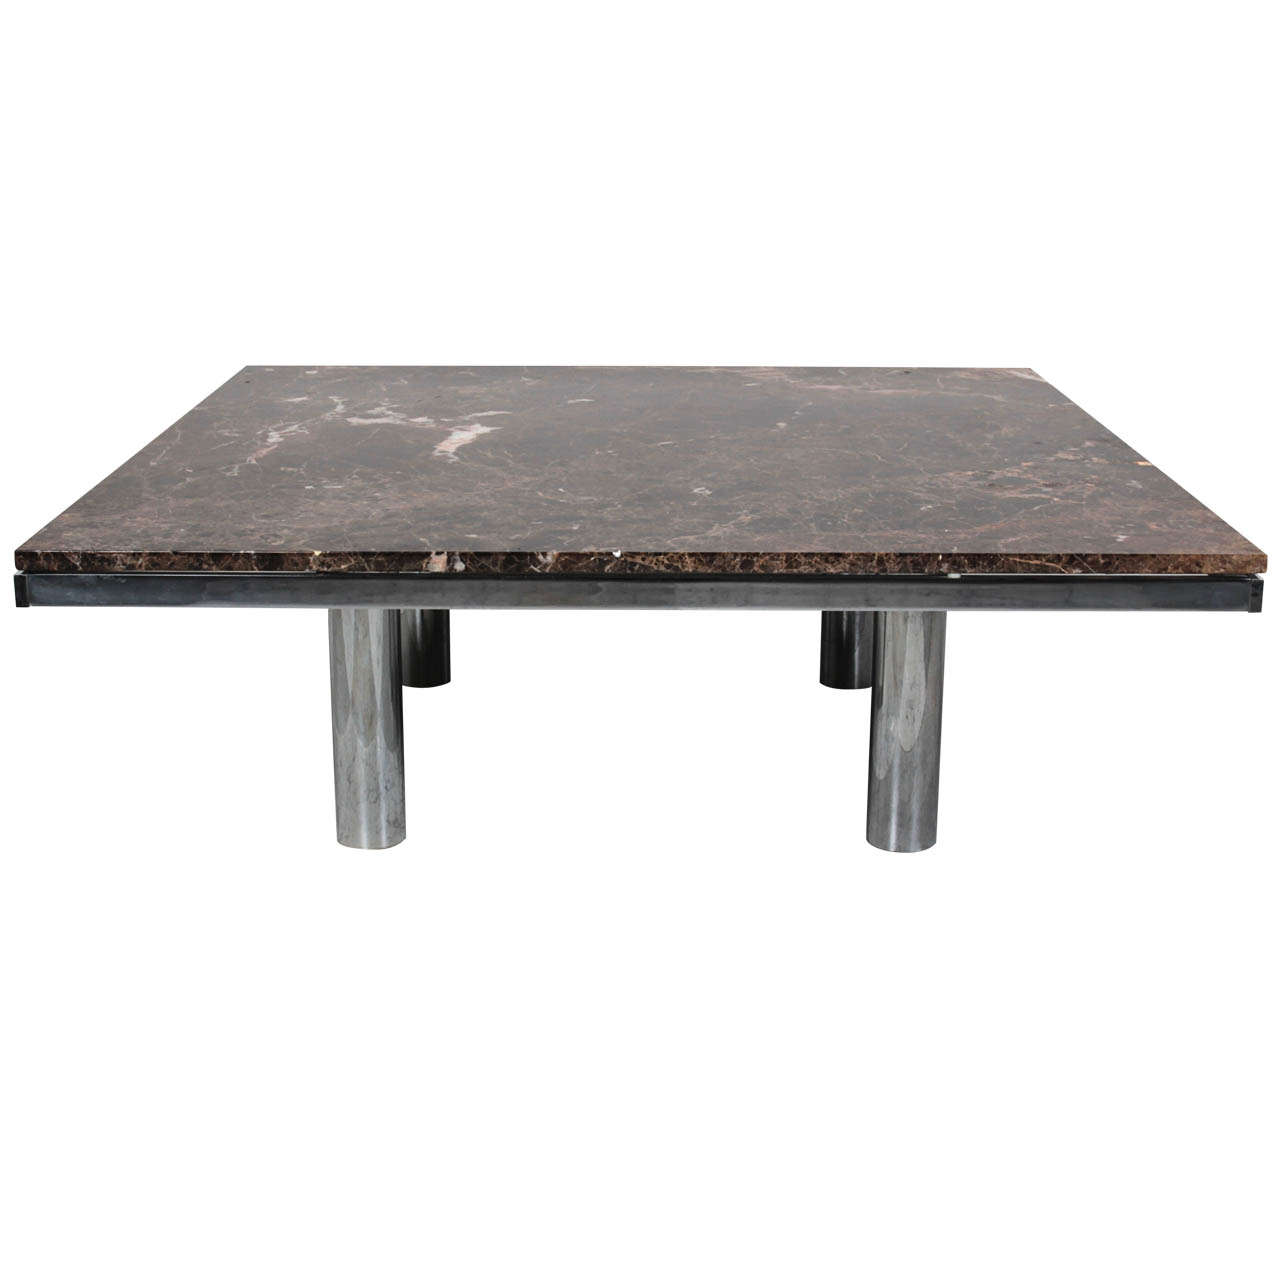 Tobia Scarpa "Andre" Coffee Table with Saint Laurent Marble-Top